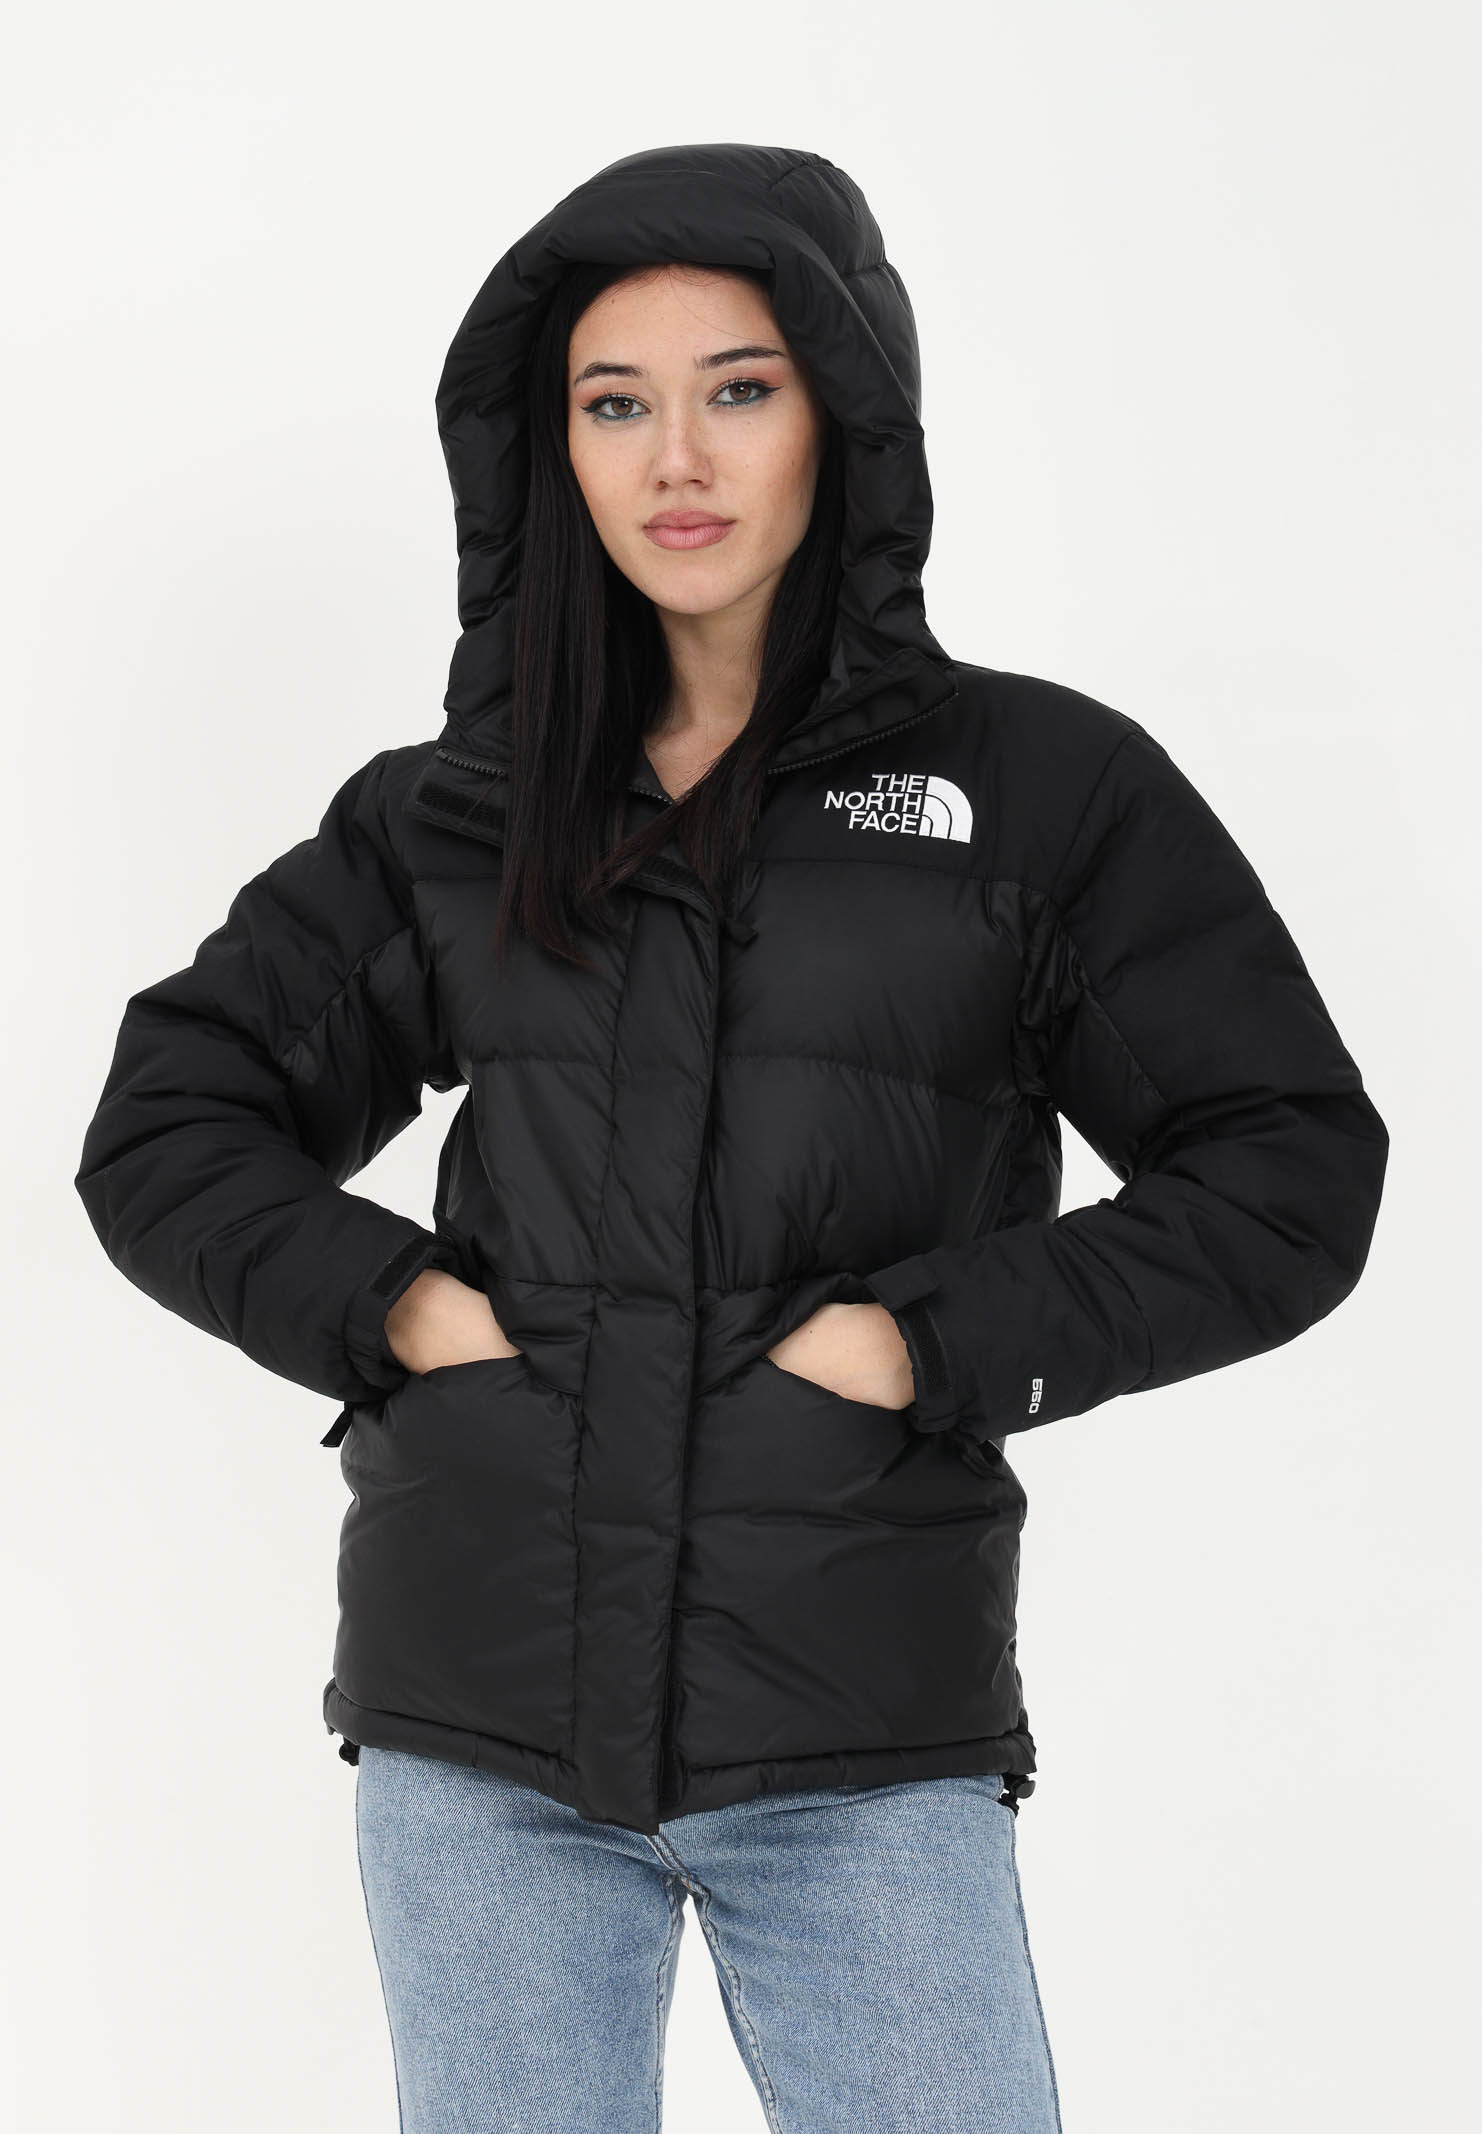 Black women's down jacket with logo - THE NORTH FACE - Pavidas